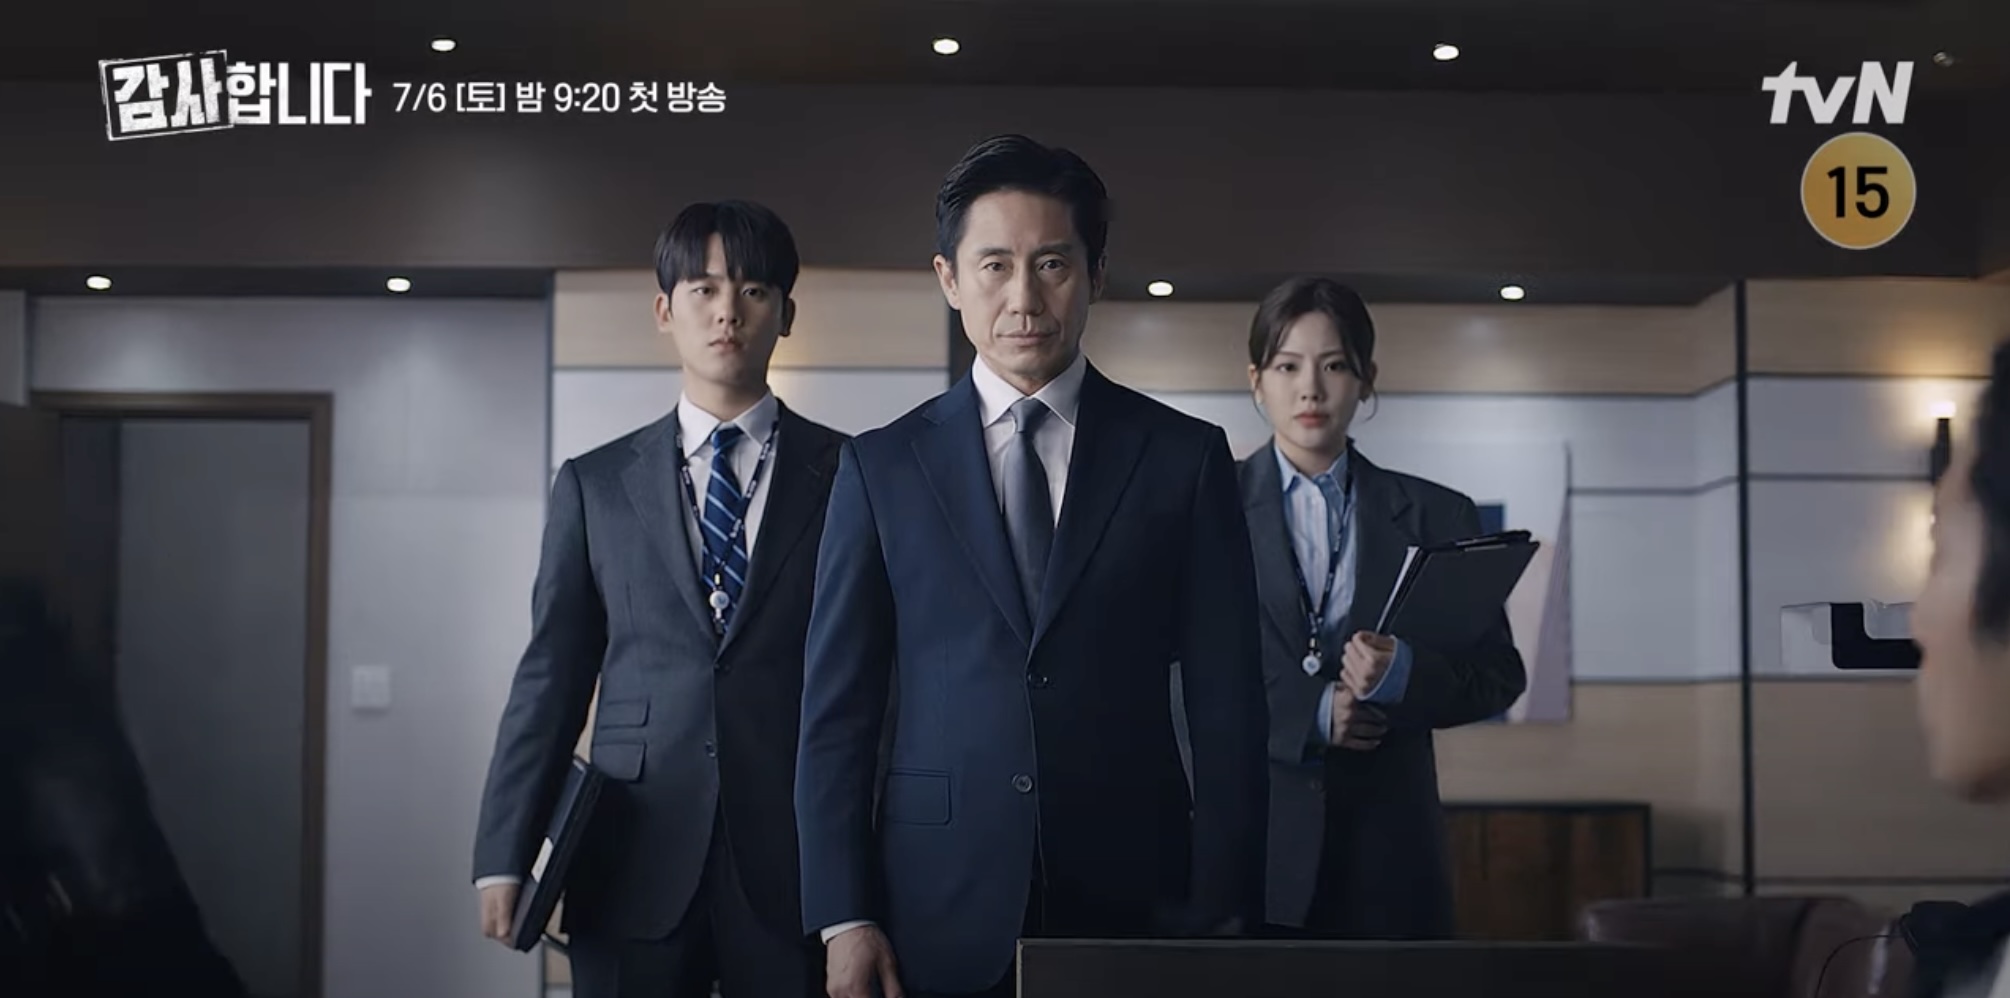 The Auditors mean business in new teaser